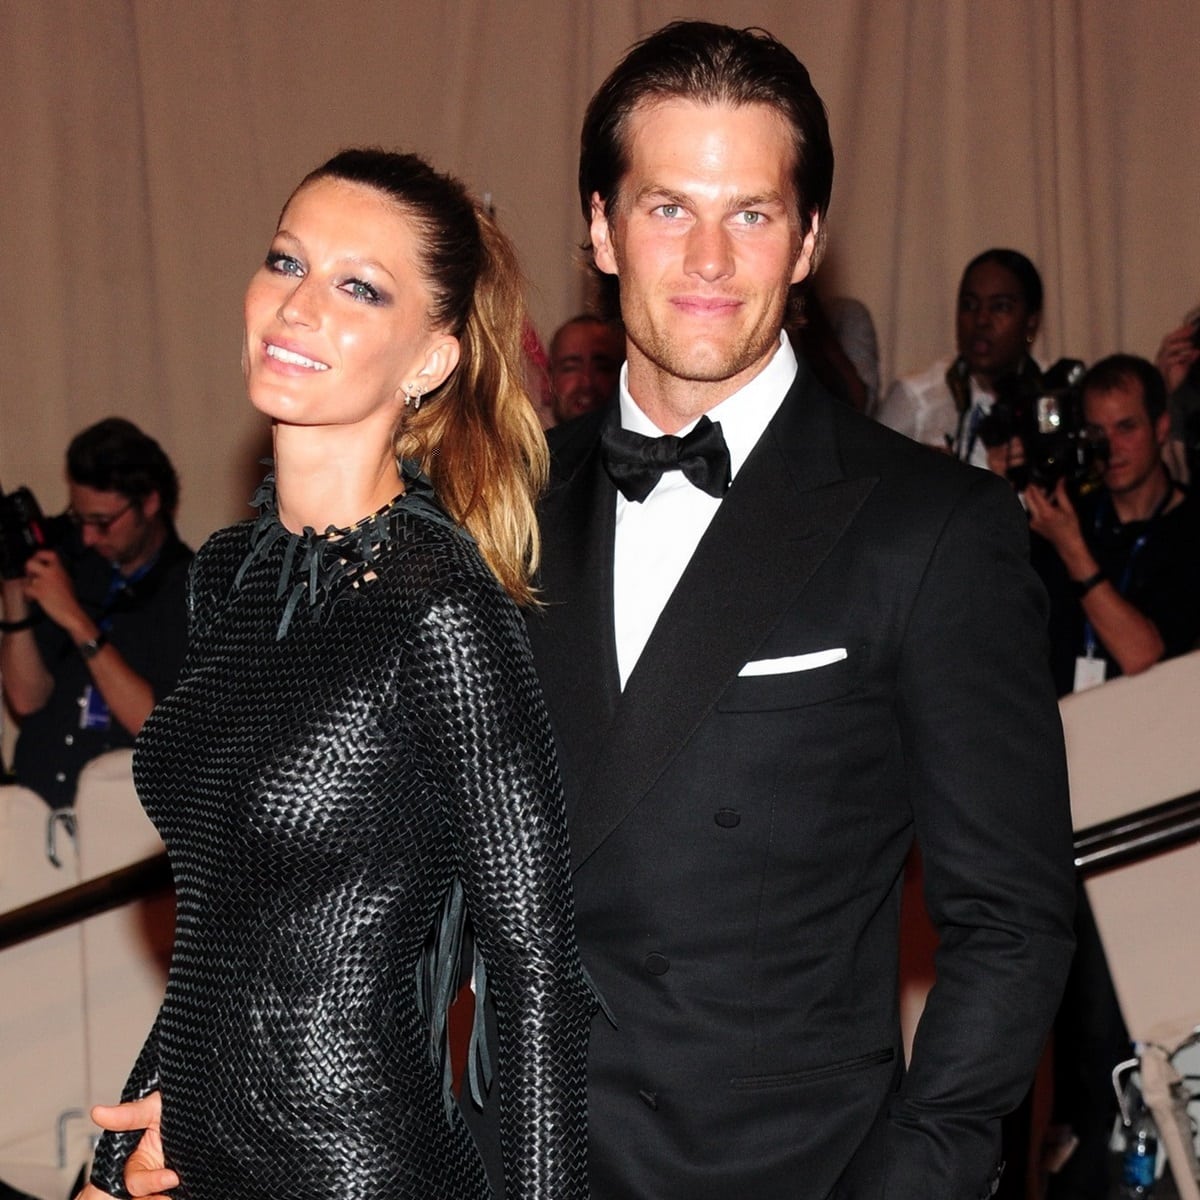 Tom Brady and Gisele Bundchen, married for 13 years, announced their divorce in October 202